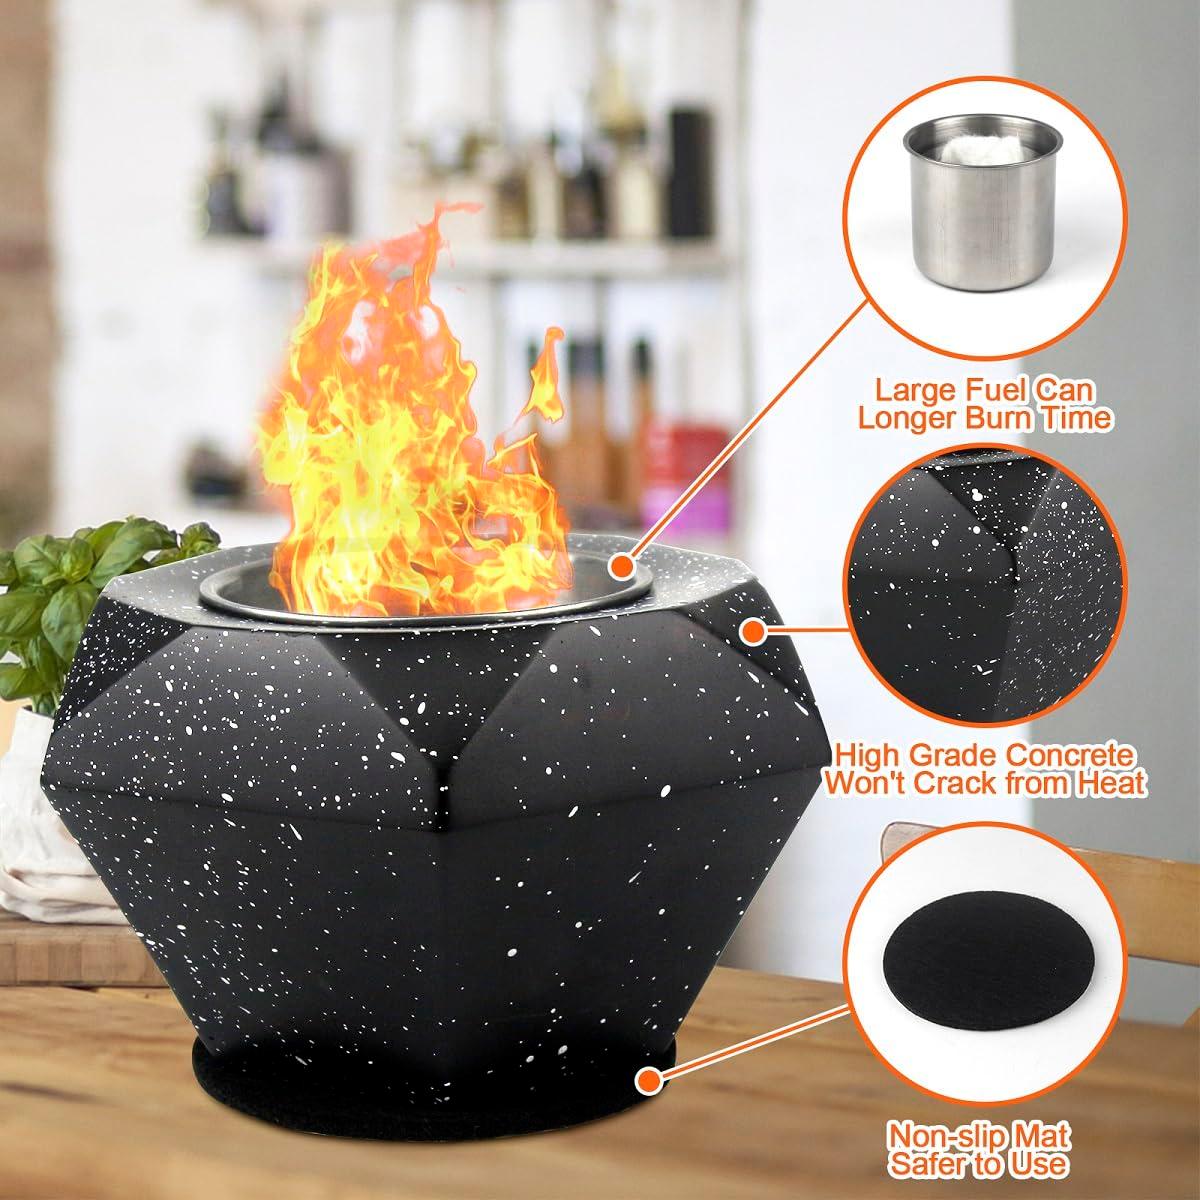 Tabletop Fire Pit Portable Concrete Table Top Fire Pit Bowl with 4 Roasting Stick Forks Mini Ethanol Fire Pit Bowl Rubbing Alcohol Fireplace Best Gifts for Friends Family - CookCave